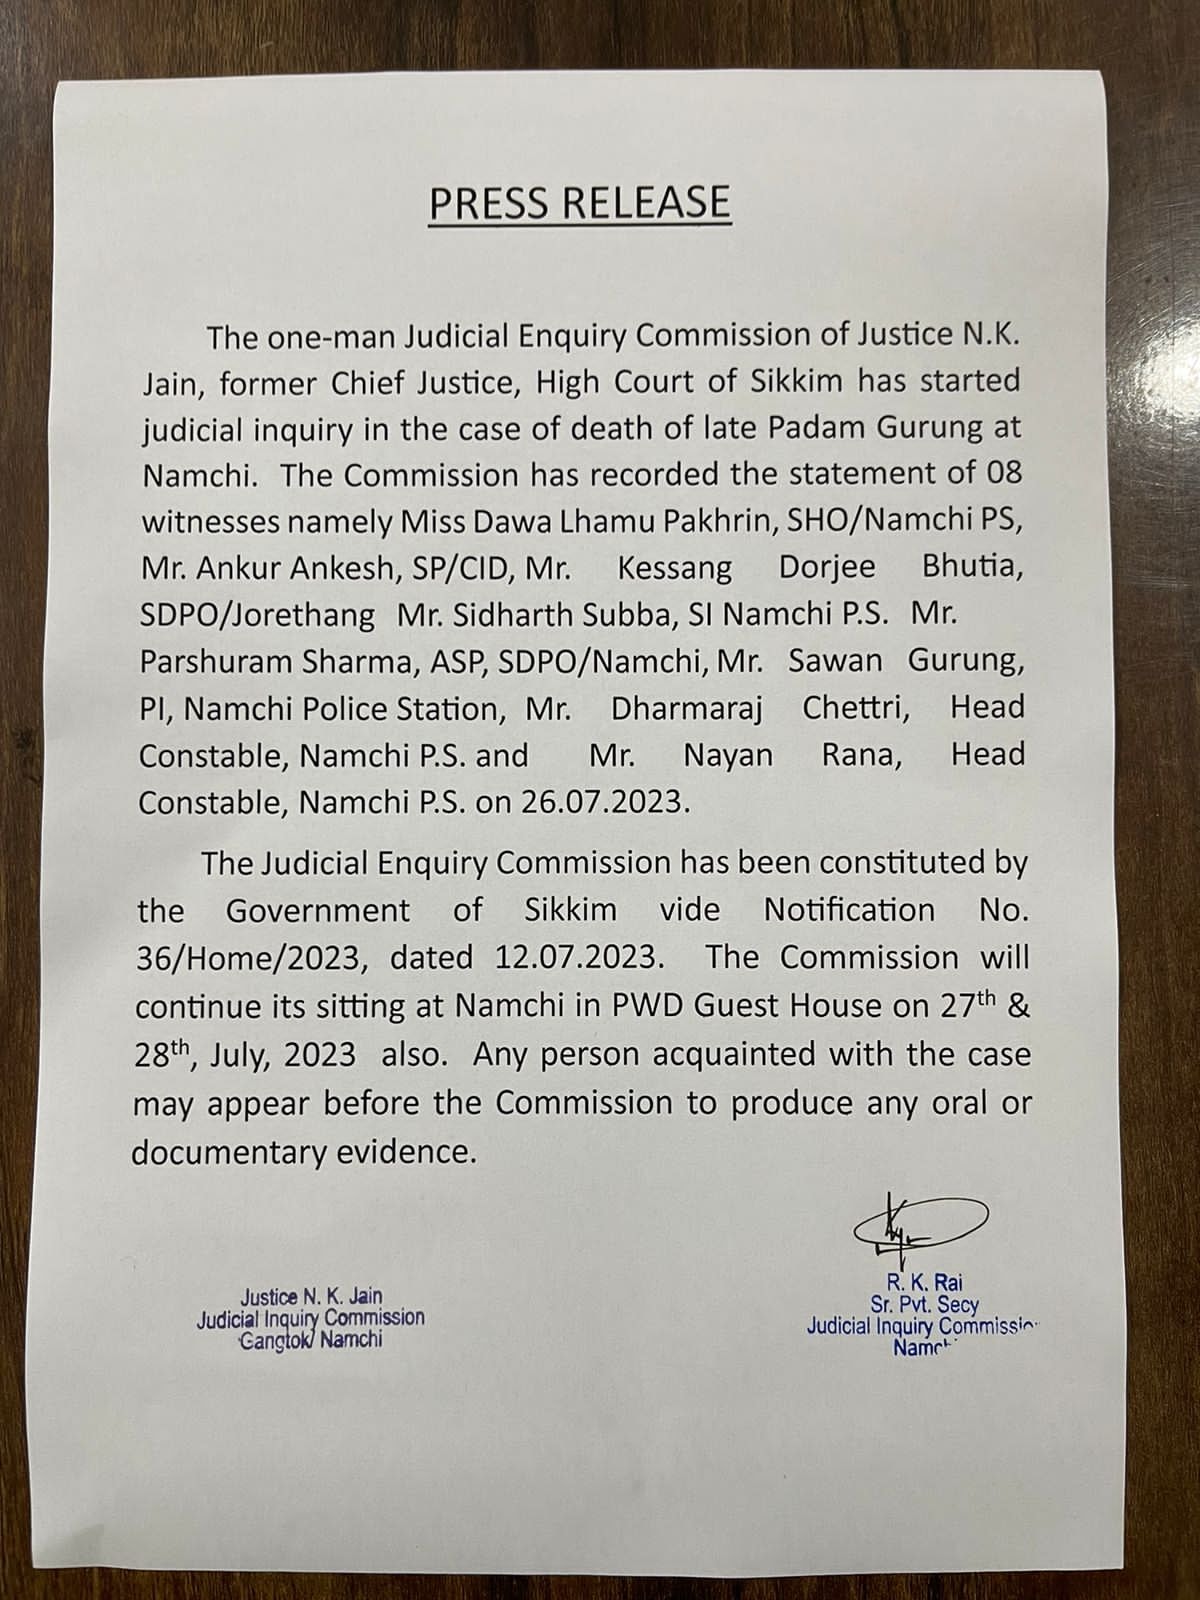 One-Man Judicial Enquiry Commission Begins Investigation into Late Padam Gurung's Death